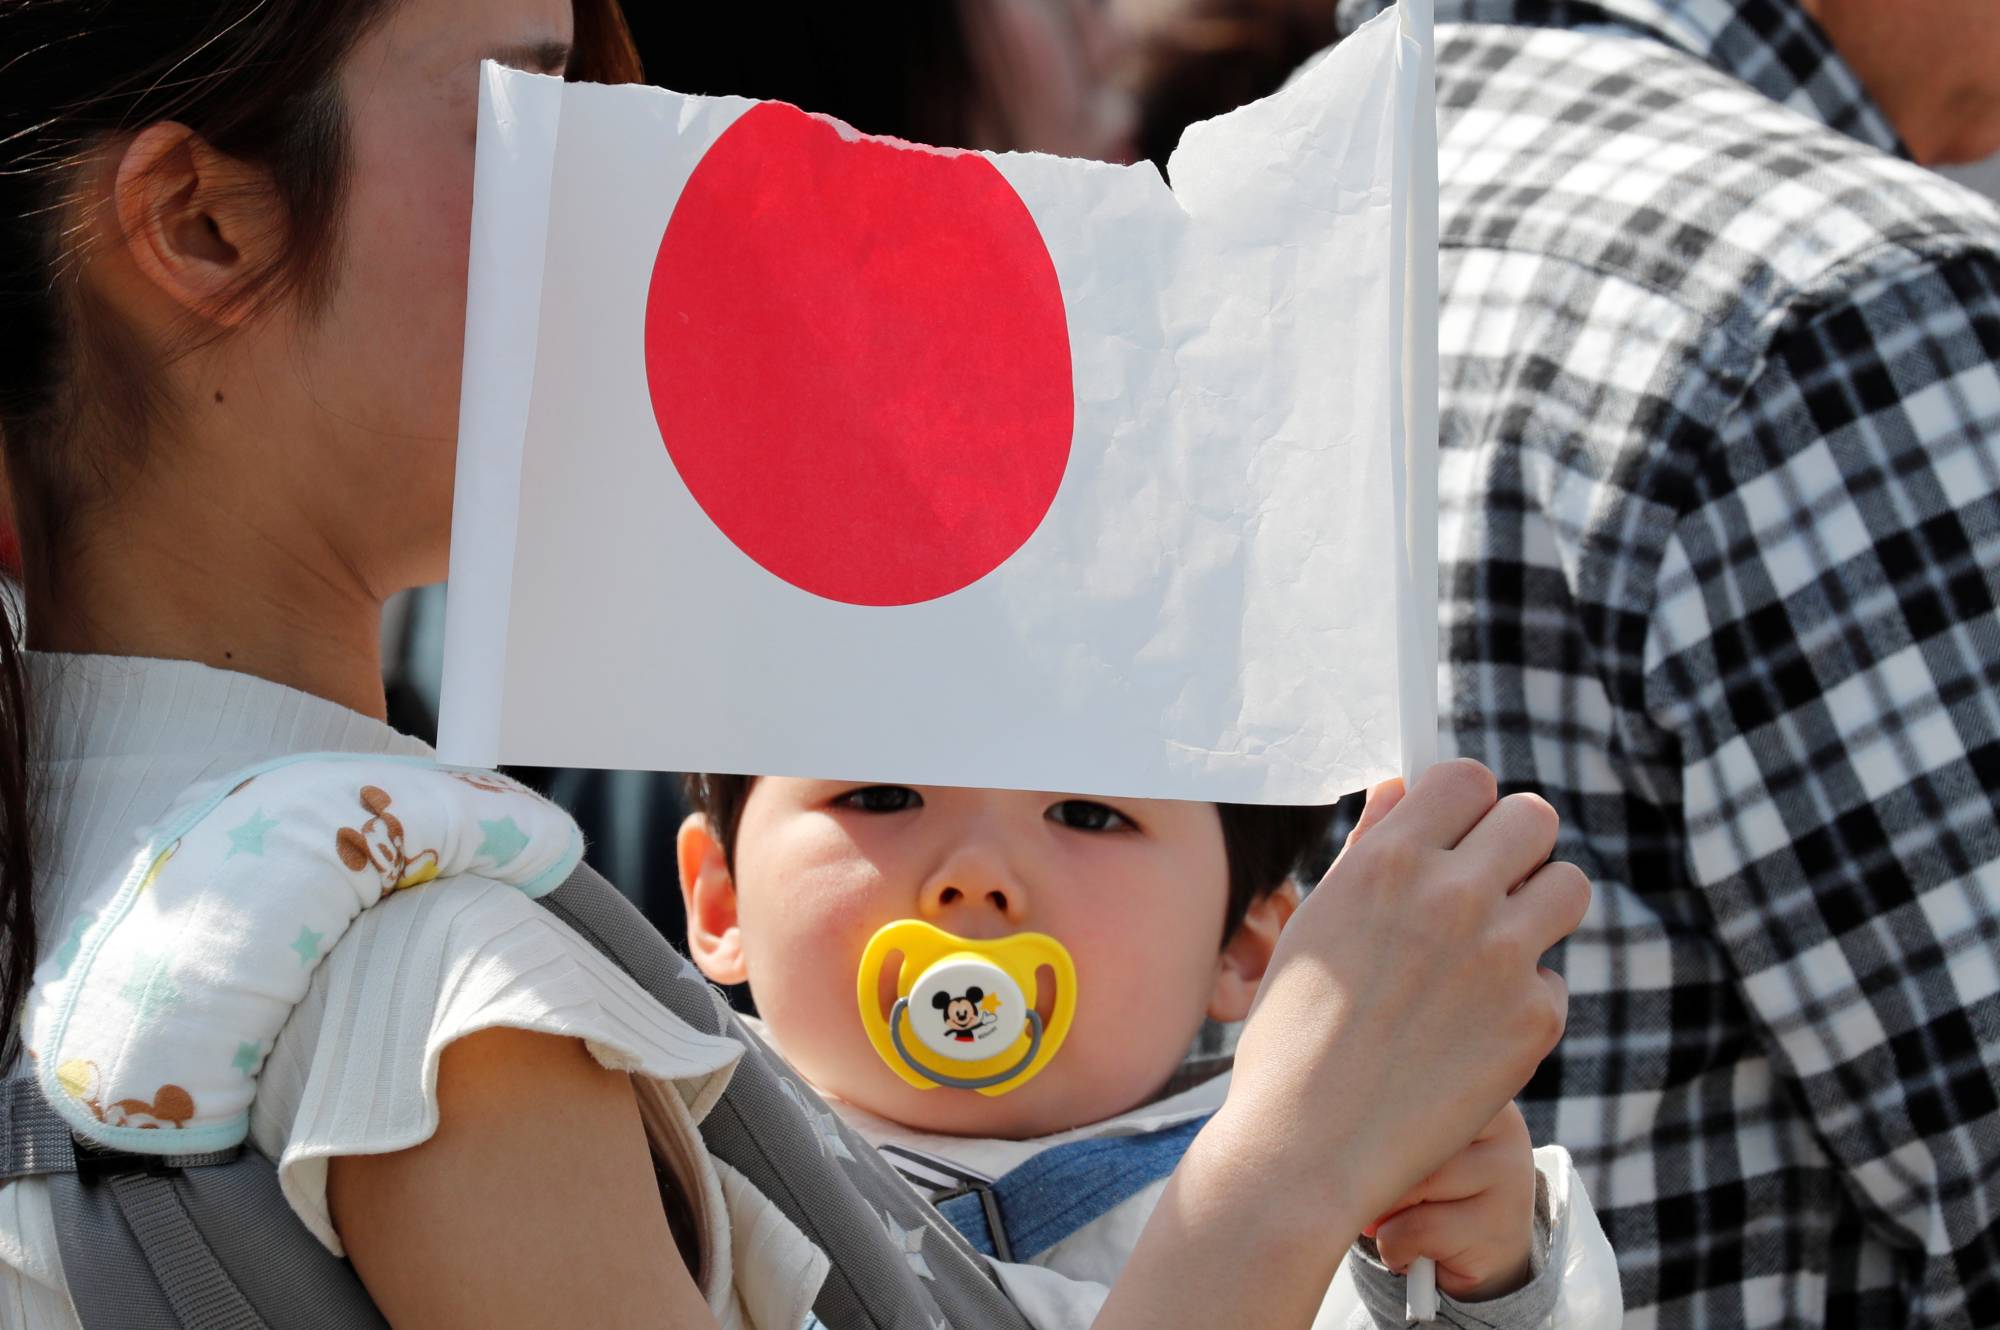 Around half of unmarried people under 30 in Japan have no interest in having children, a recent survey has shown, with respondents citing economic concerns and the burden of childbirth and parenting as their reasoning. | REUTERS